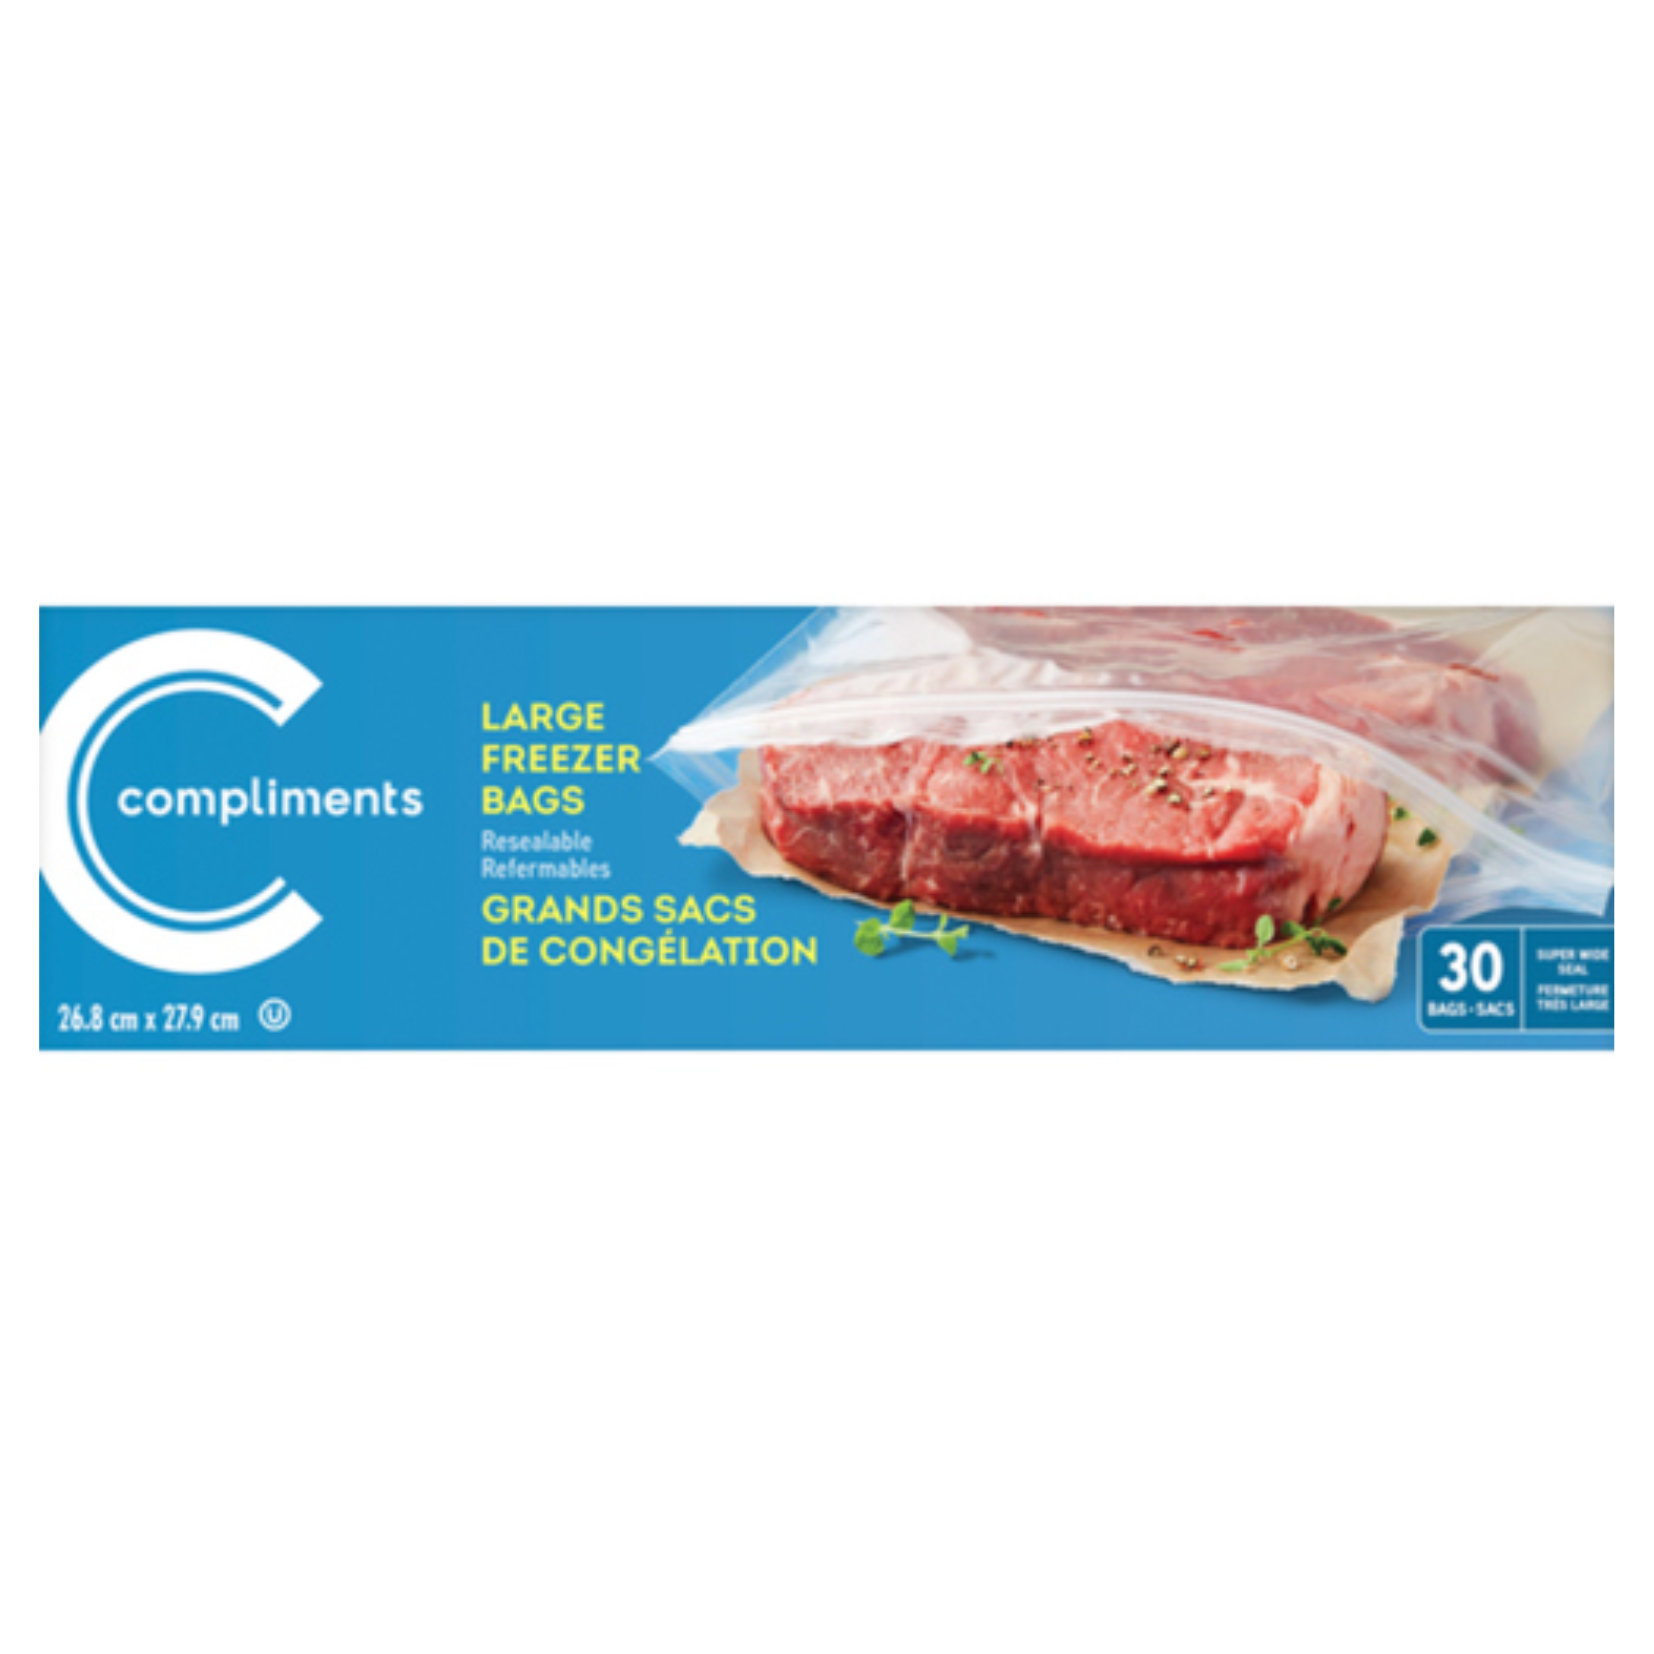 Compliments Large Freezer Bags 30ct